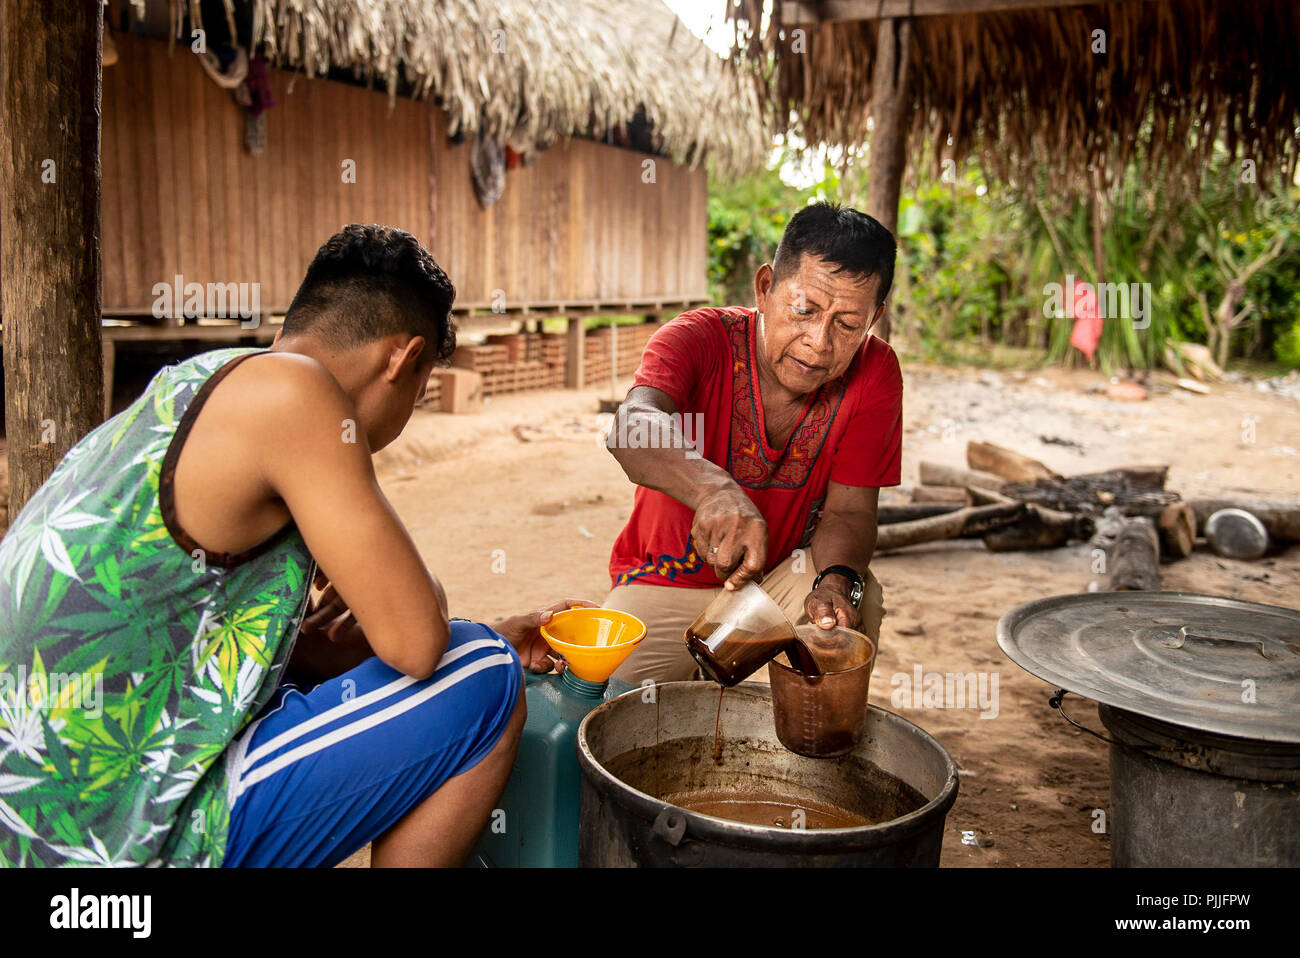 Pucallpa, Peru. 17th July, 2018. A shaman (R) puts a broth of 'Ayahuasca' into a cup. The brew, which is prepared from the liana Banisteriopsis caapi, is used for medical or religious purposes in the Peruvian Shipibo ethnic group and in various Amazonian ethnic groups. Credit: Ana Karina Delgado/dpa/Alamy Live News Stock Photo